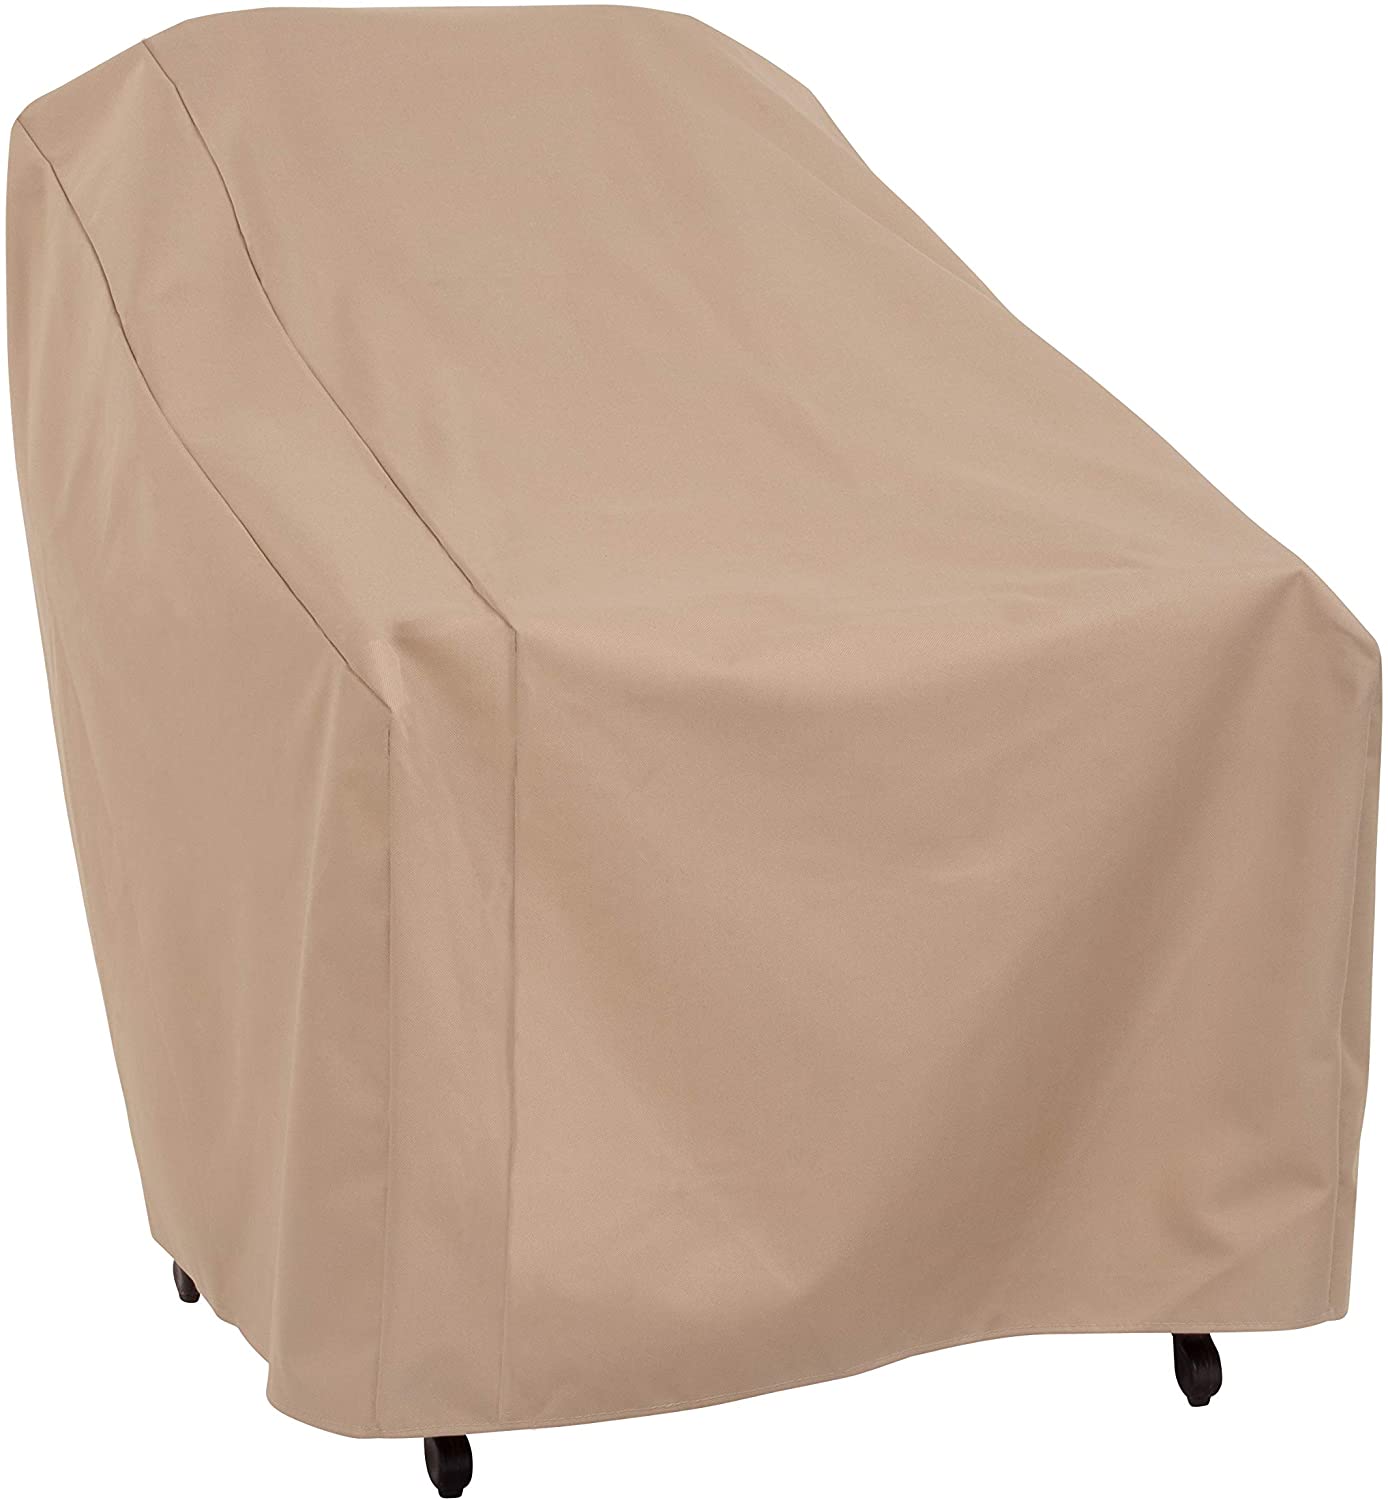 Modern Leisure Basics Weather Resistant Outdoor Chair Cover